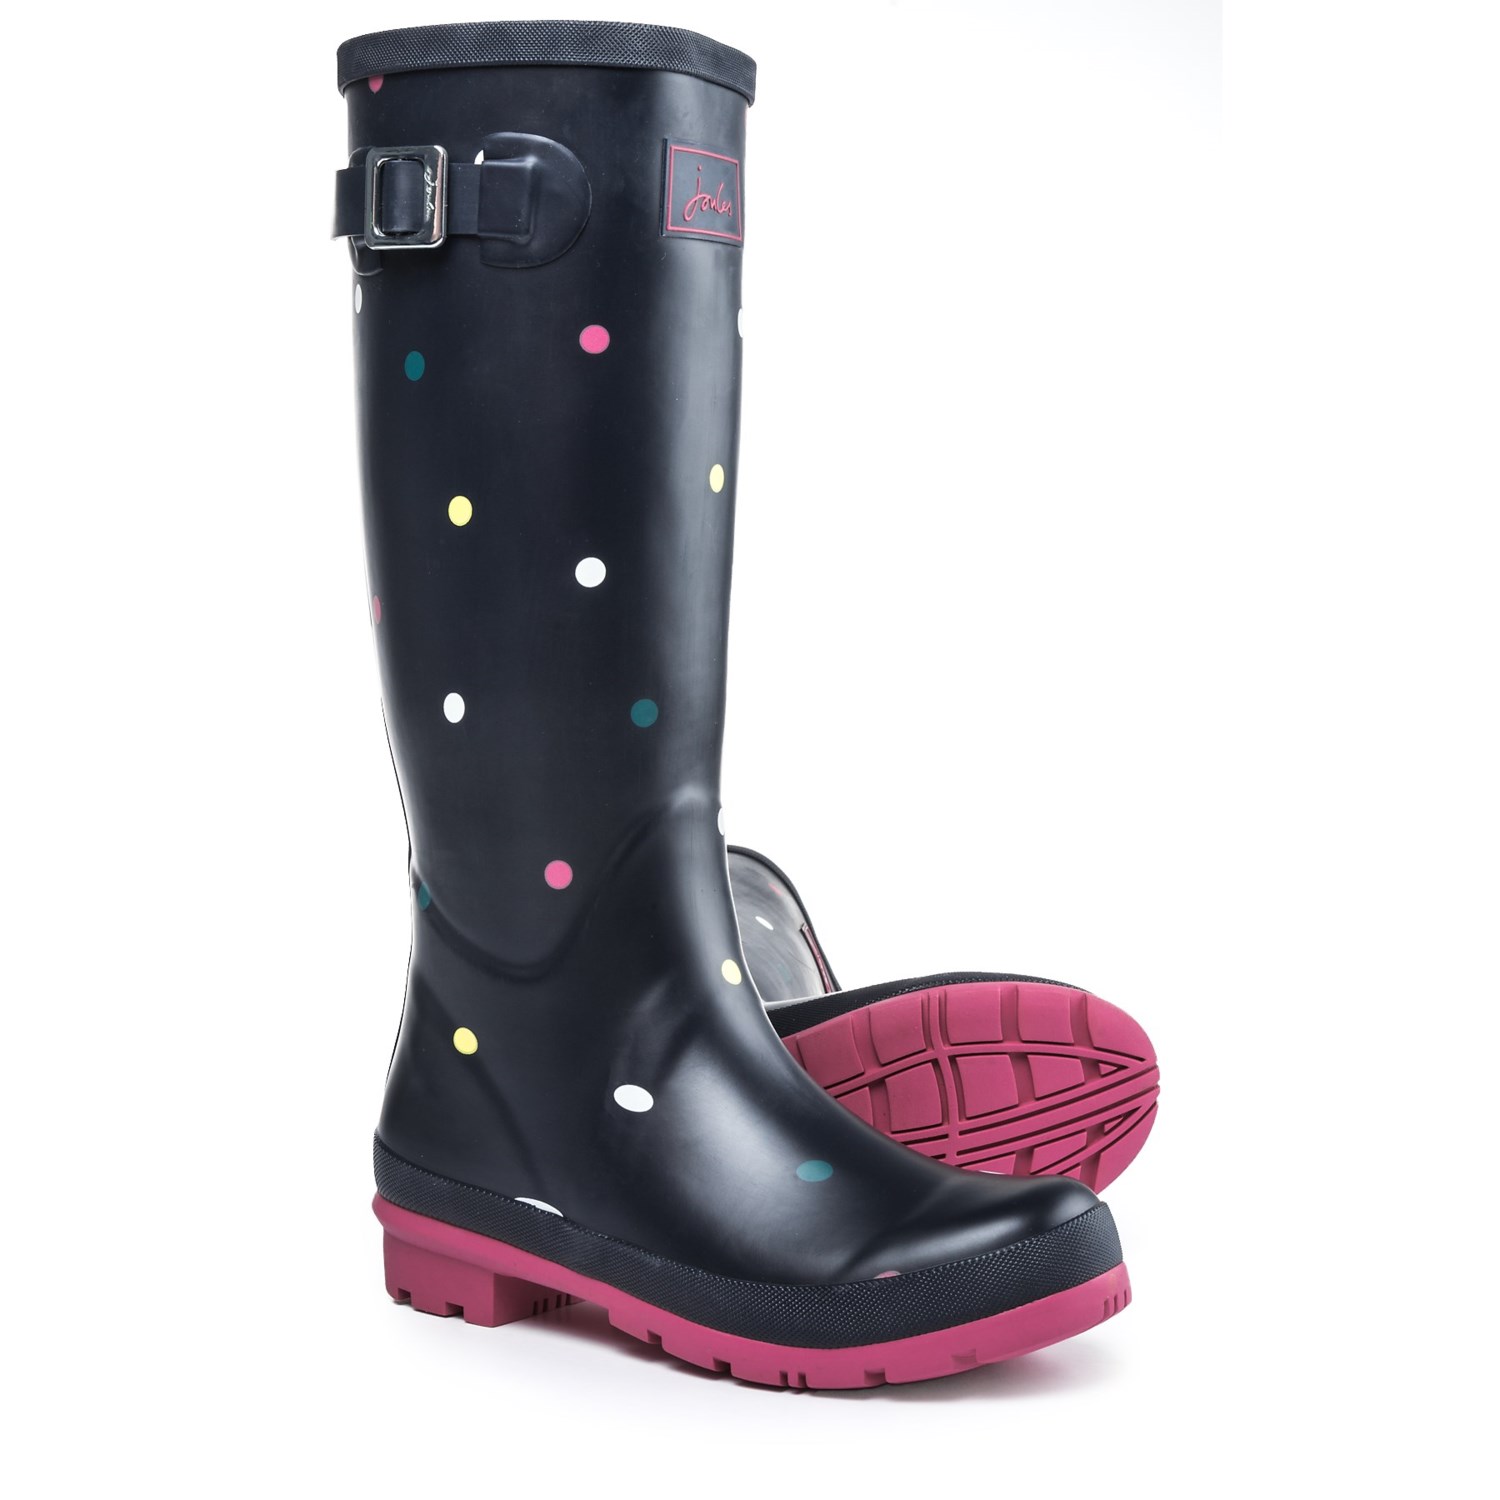 Joules Welly Print Rain Boots (For Women) - Save 33%